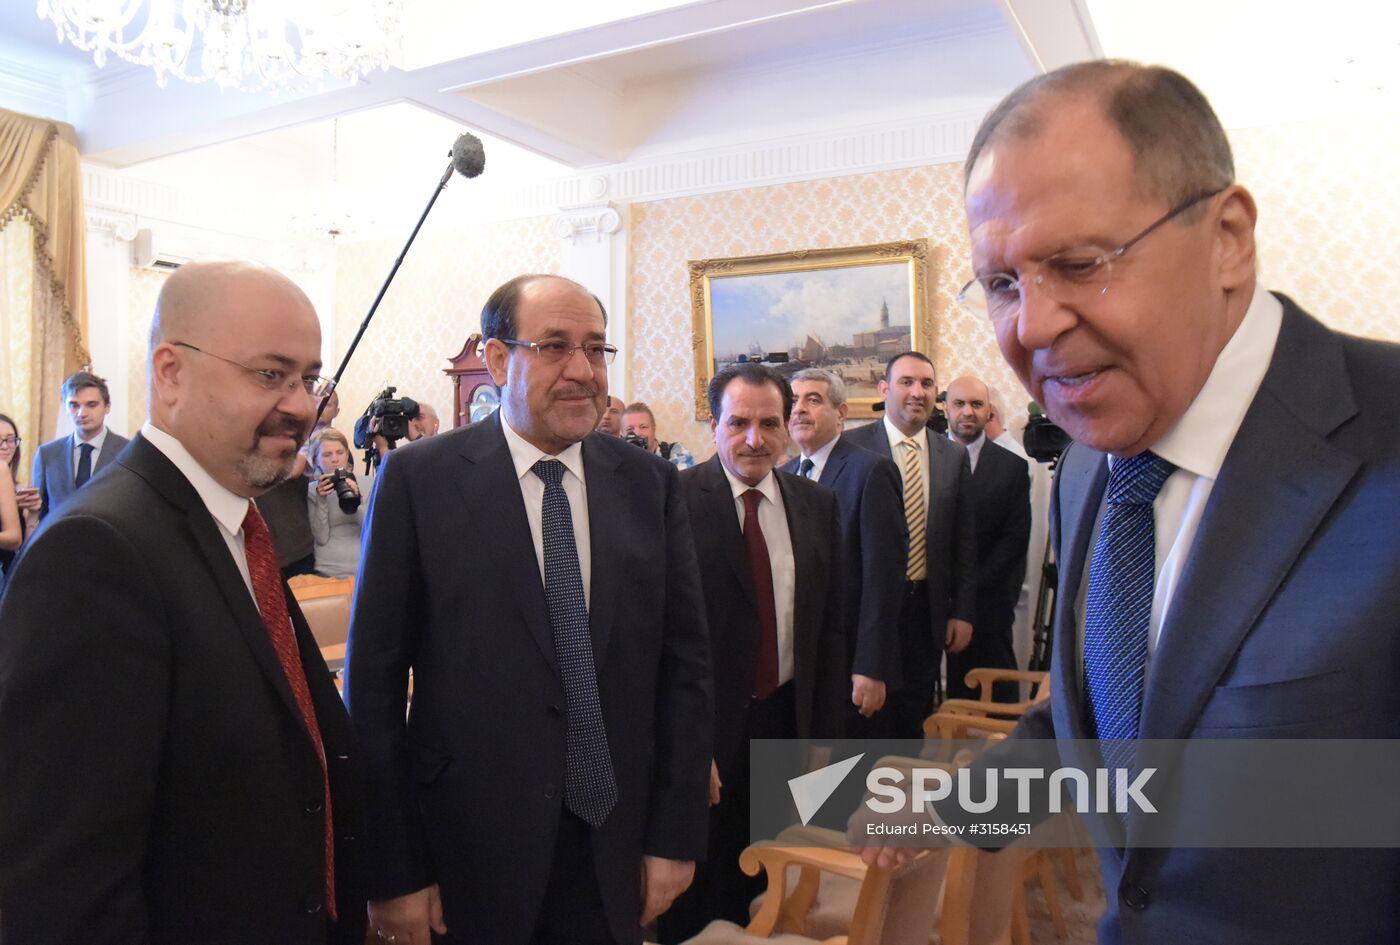 Russia's Foreign Minister Sergei Lavrov meets with Iraq's Vice President Nouri al-Maliki